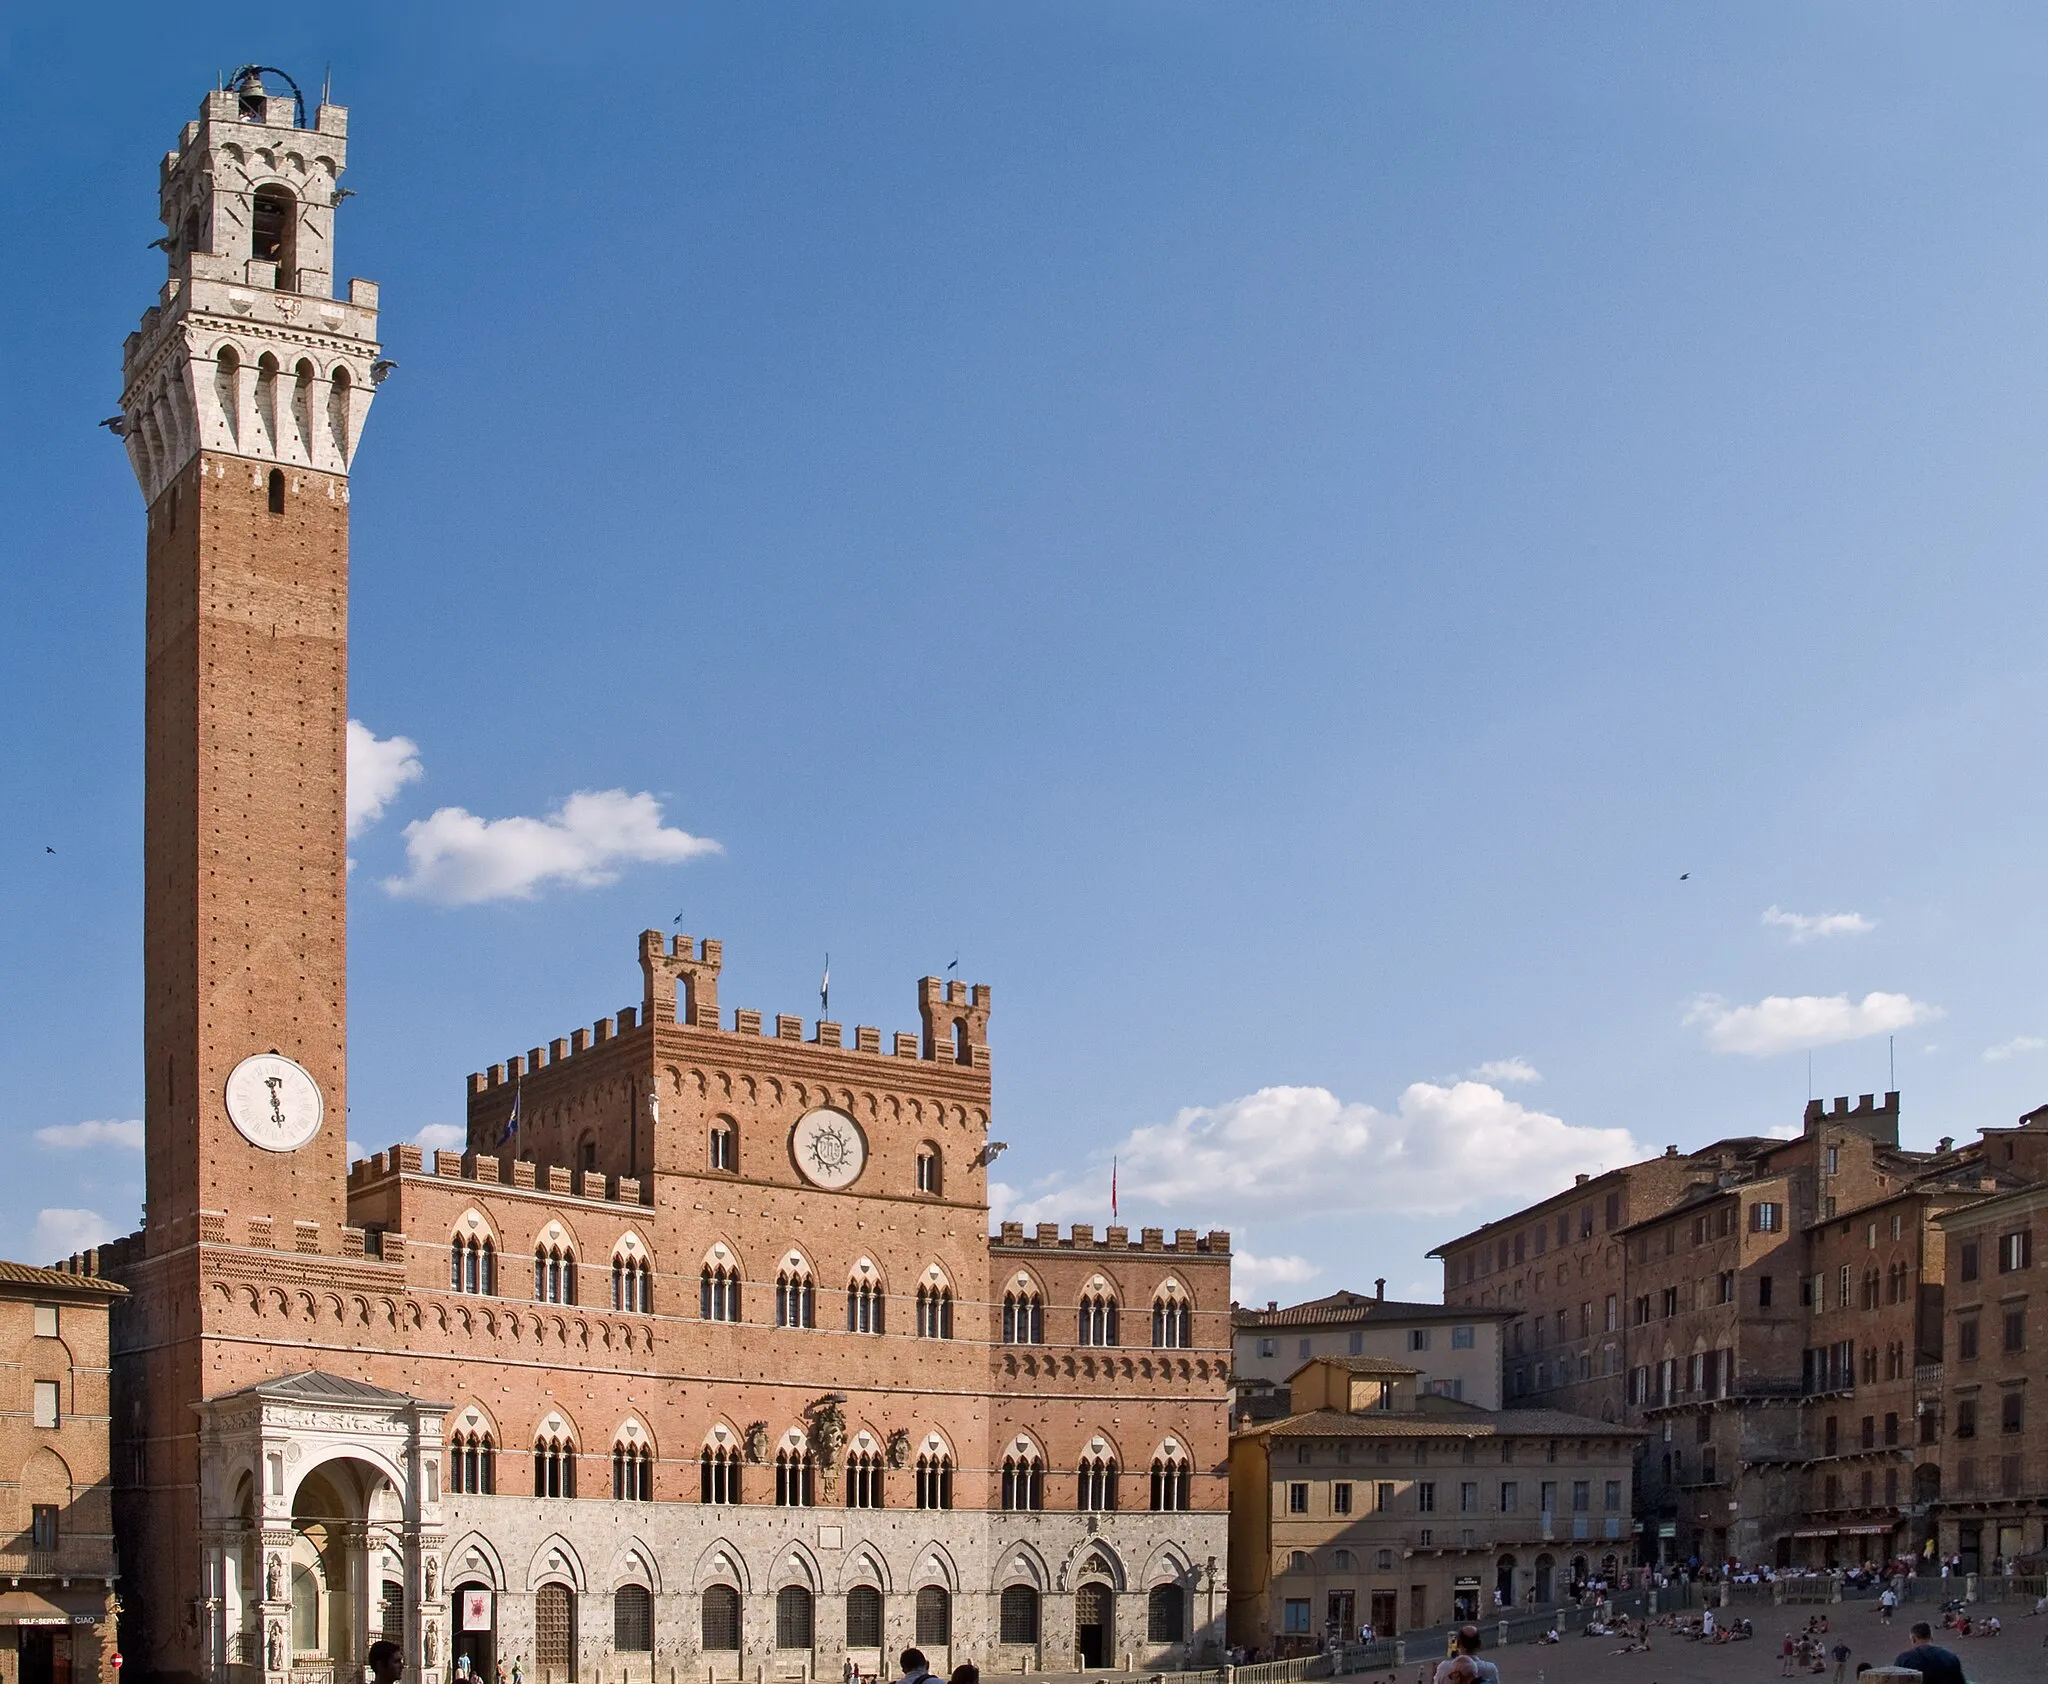 Photo showing: The Palazzo Pubblico (town hall) and the Torre del Mangia in Siena, in the Tuscany region of Italy.